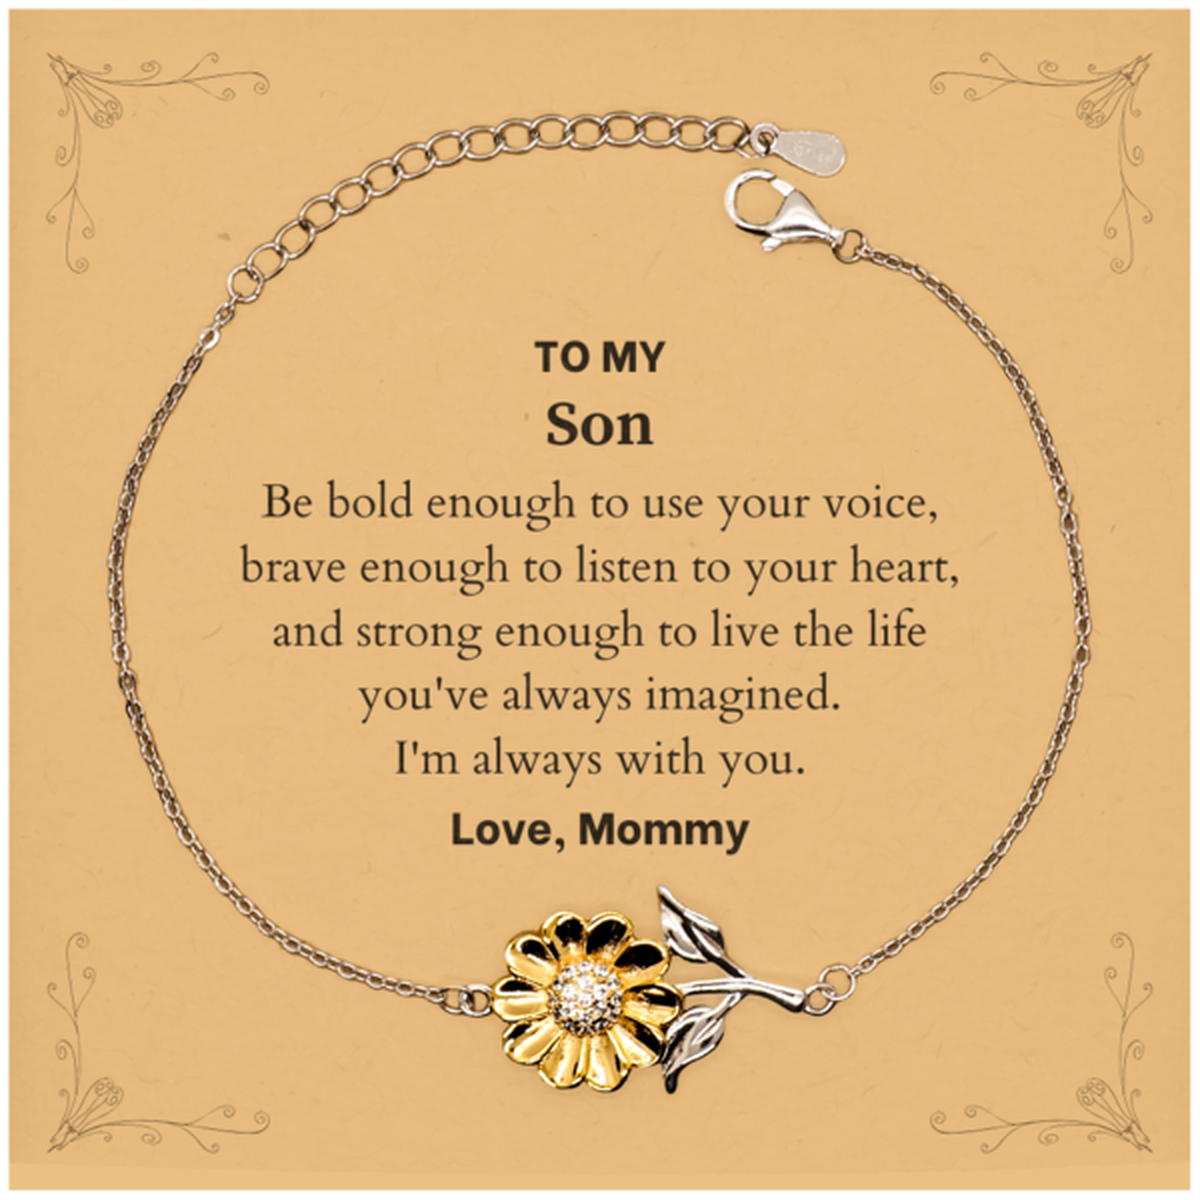 Keepsake Son Sunflower Bracelet Gift Idea Graduation Christmas Birthday Son from Mommy, Son Be bold enough to use your voice, brave enough to listen to your heart. Love, Mommy